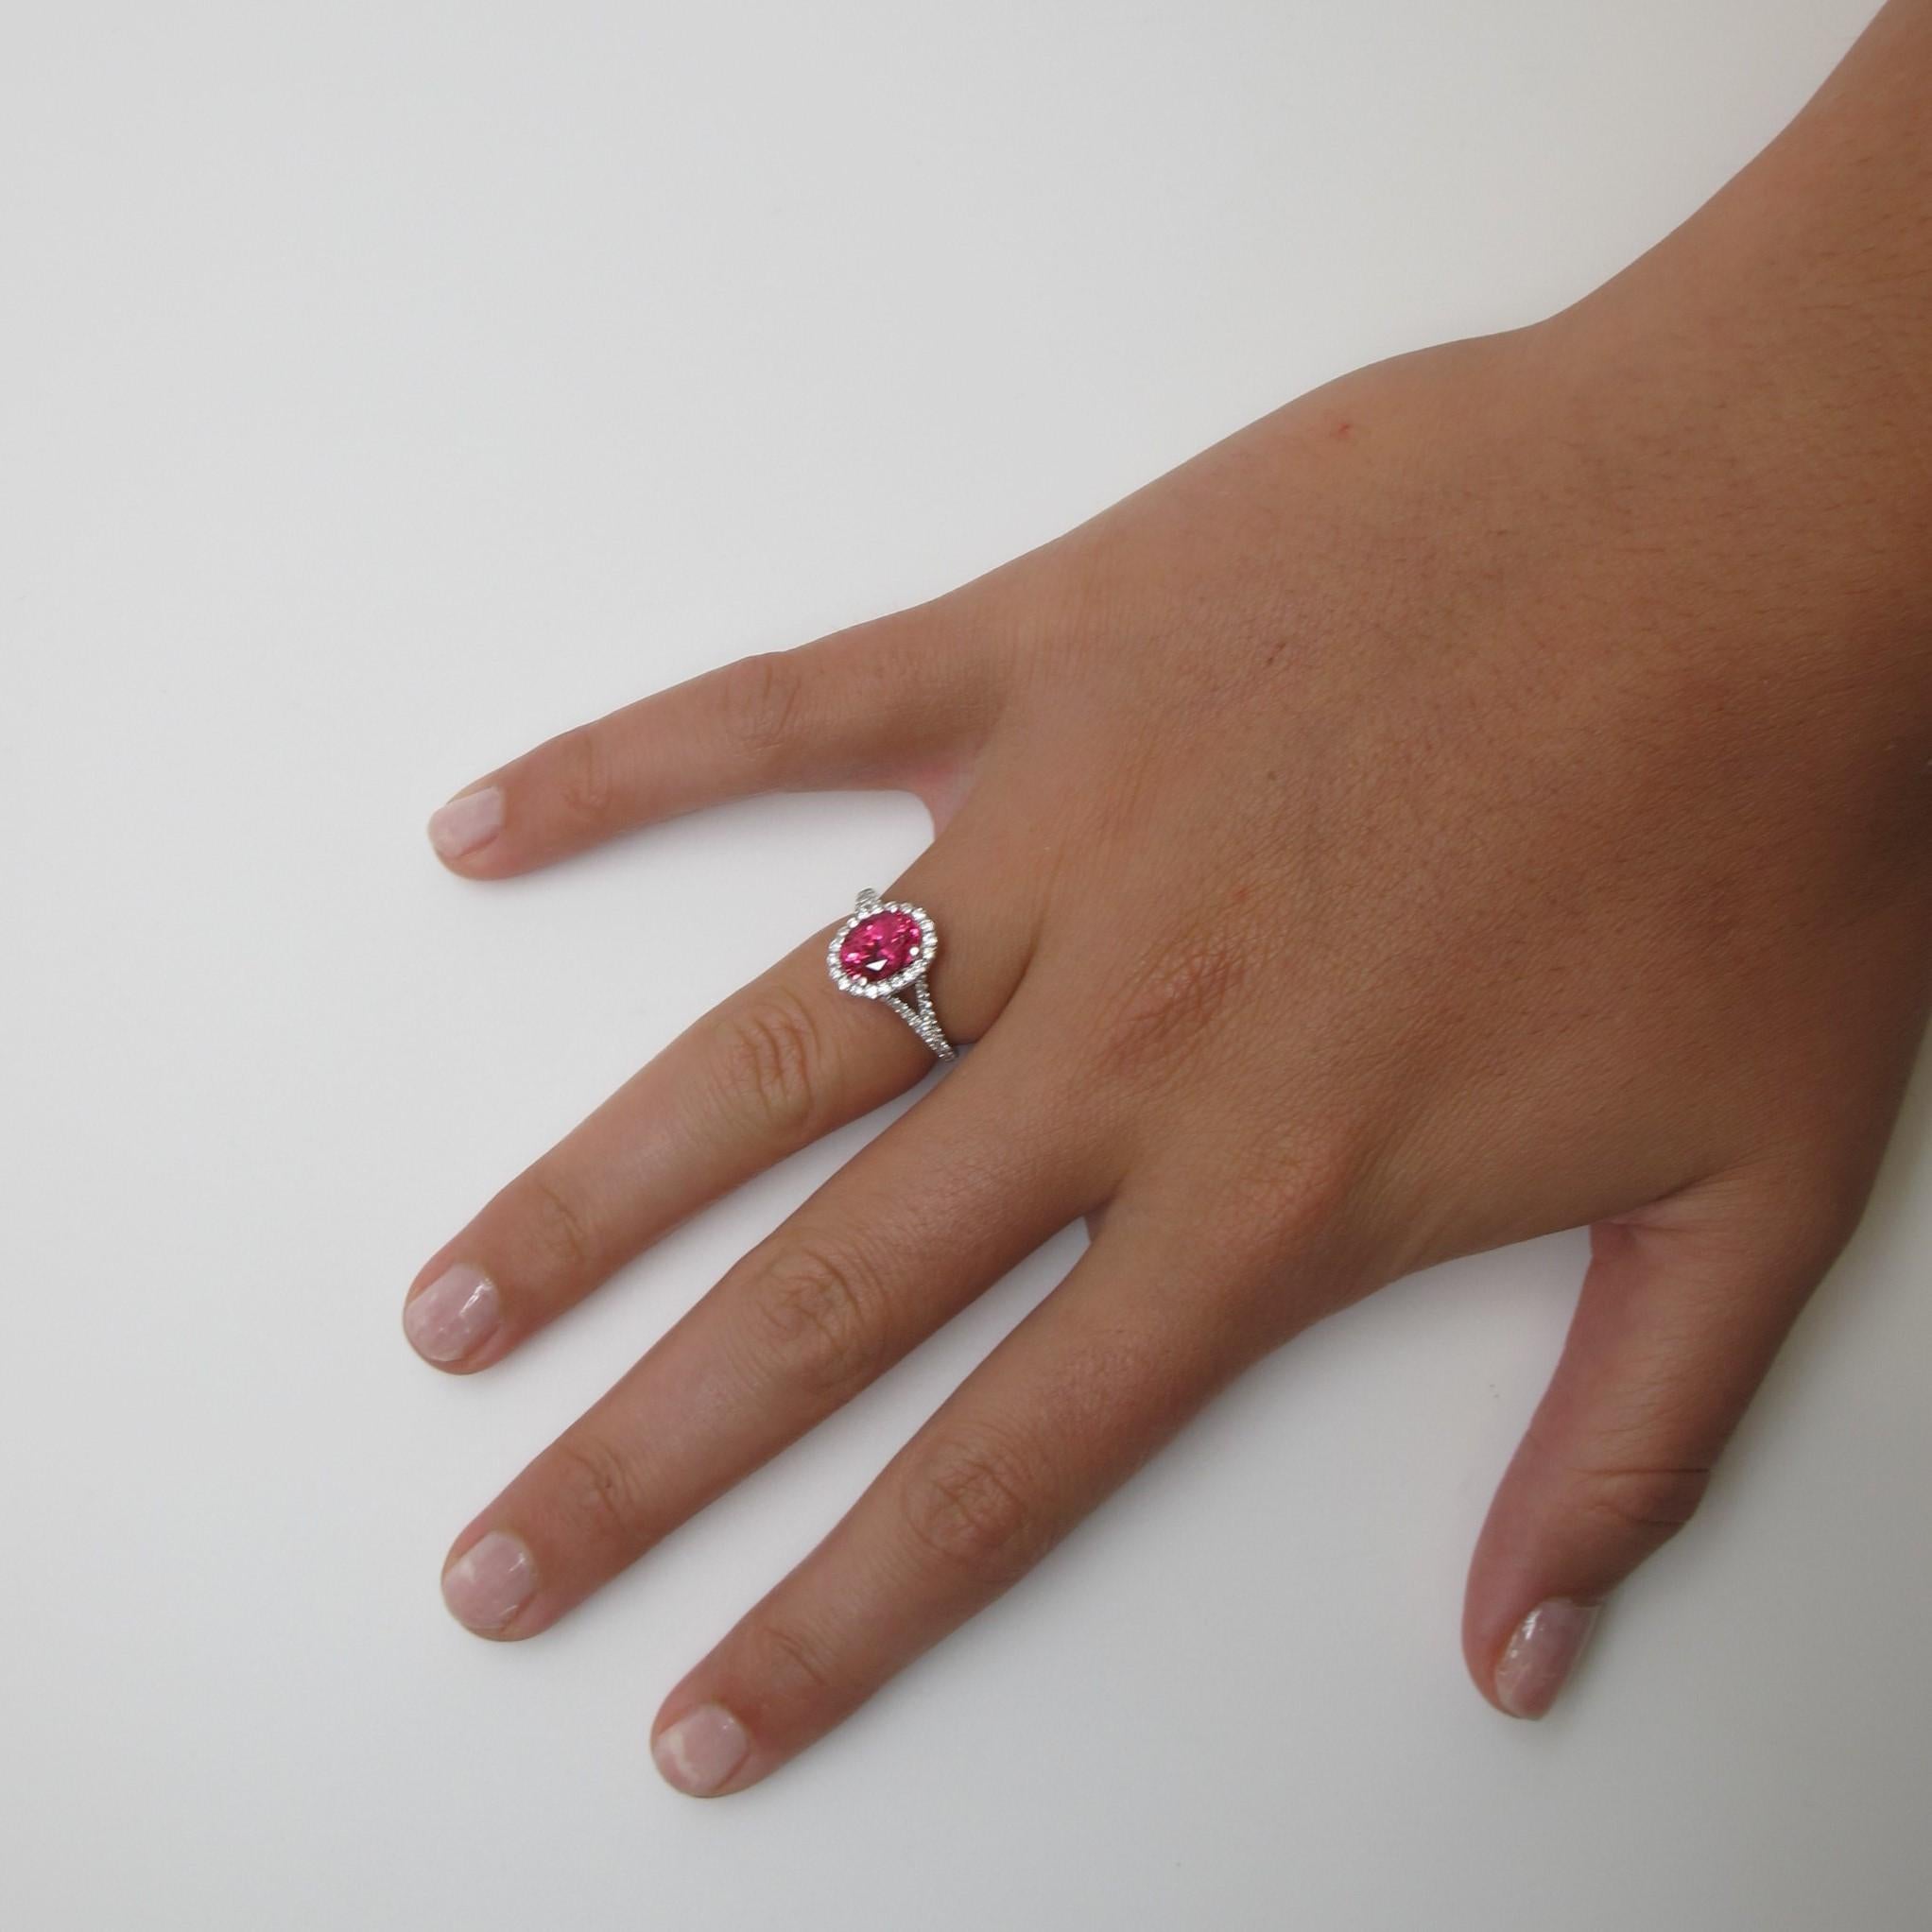 This fiery fuchsia colored spinel is both bright and bold! Perfect for any occasion, the spinel measures 8.53x6.57x4.73mm (2.63 carats) and is set with 74 fine quality brilliant cut diamonds (0.64 carats total weight). It is a 